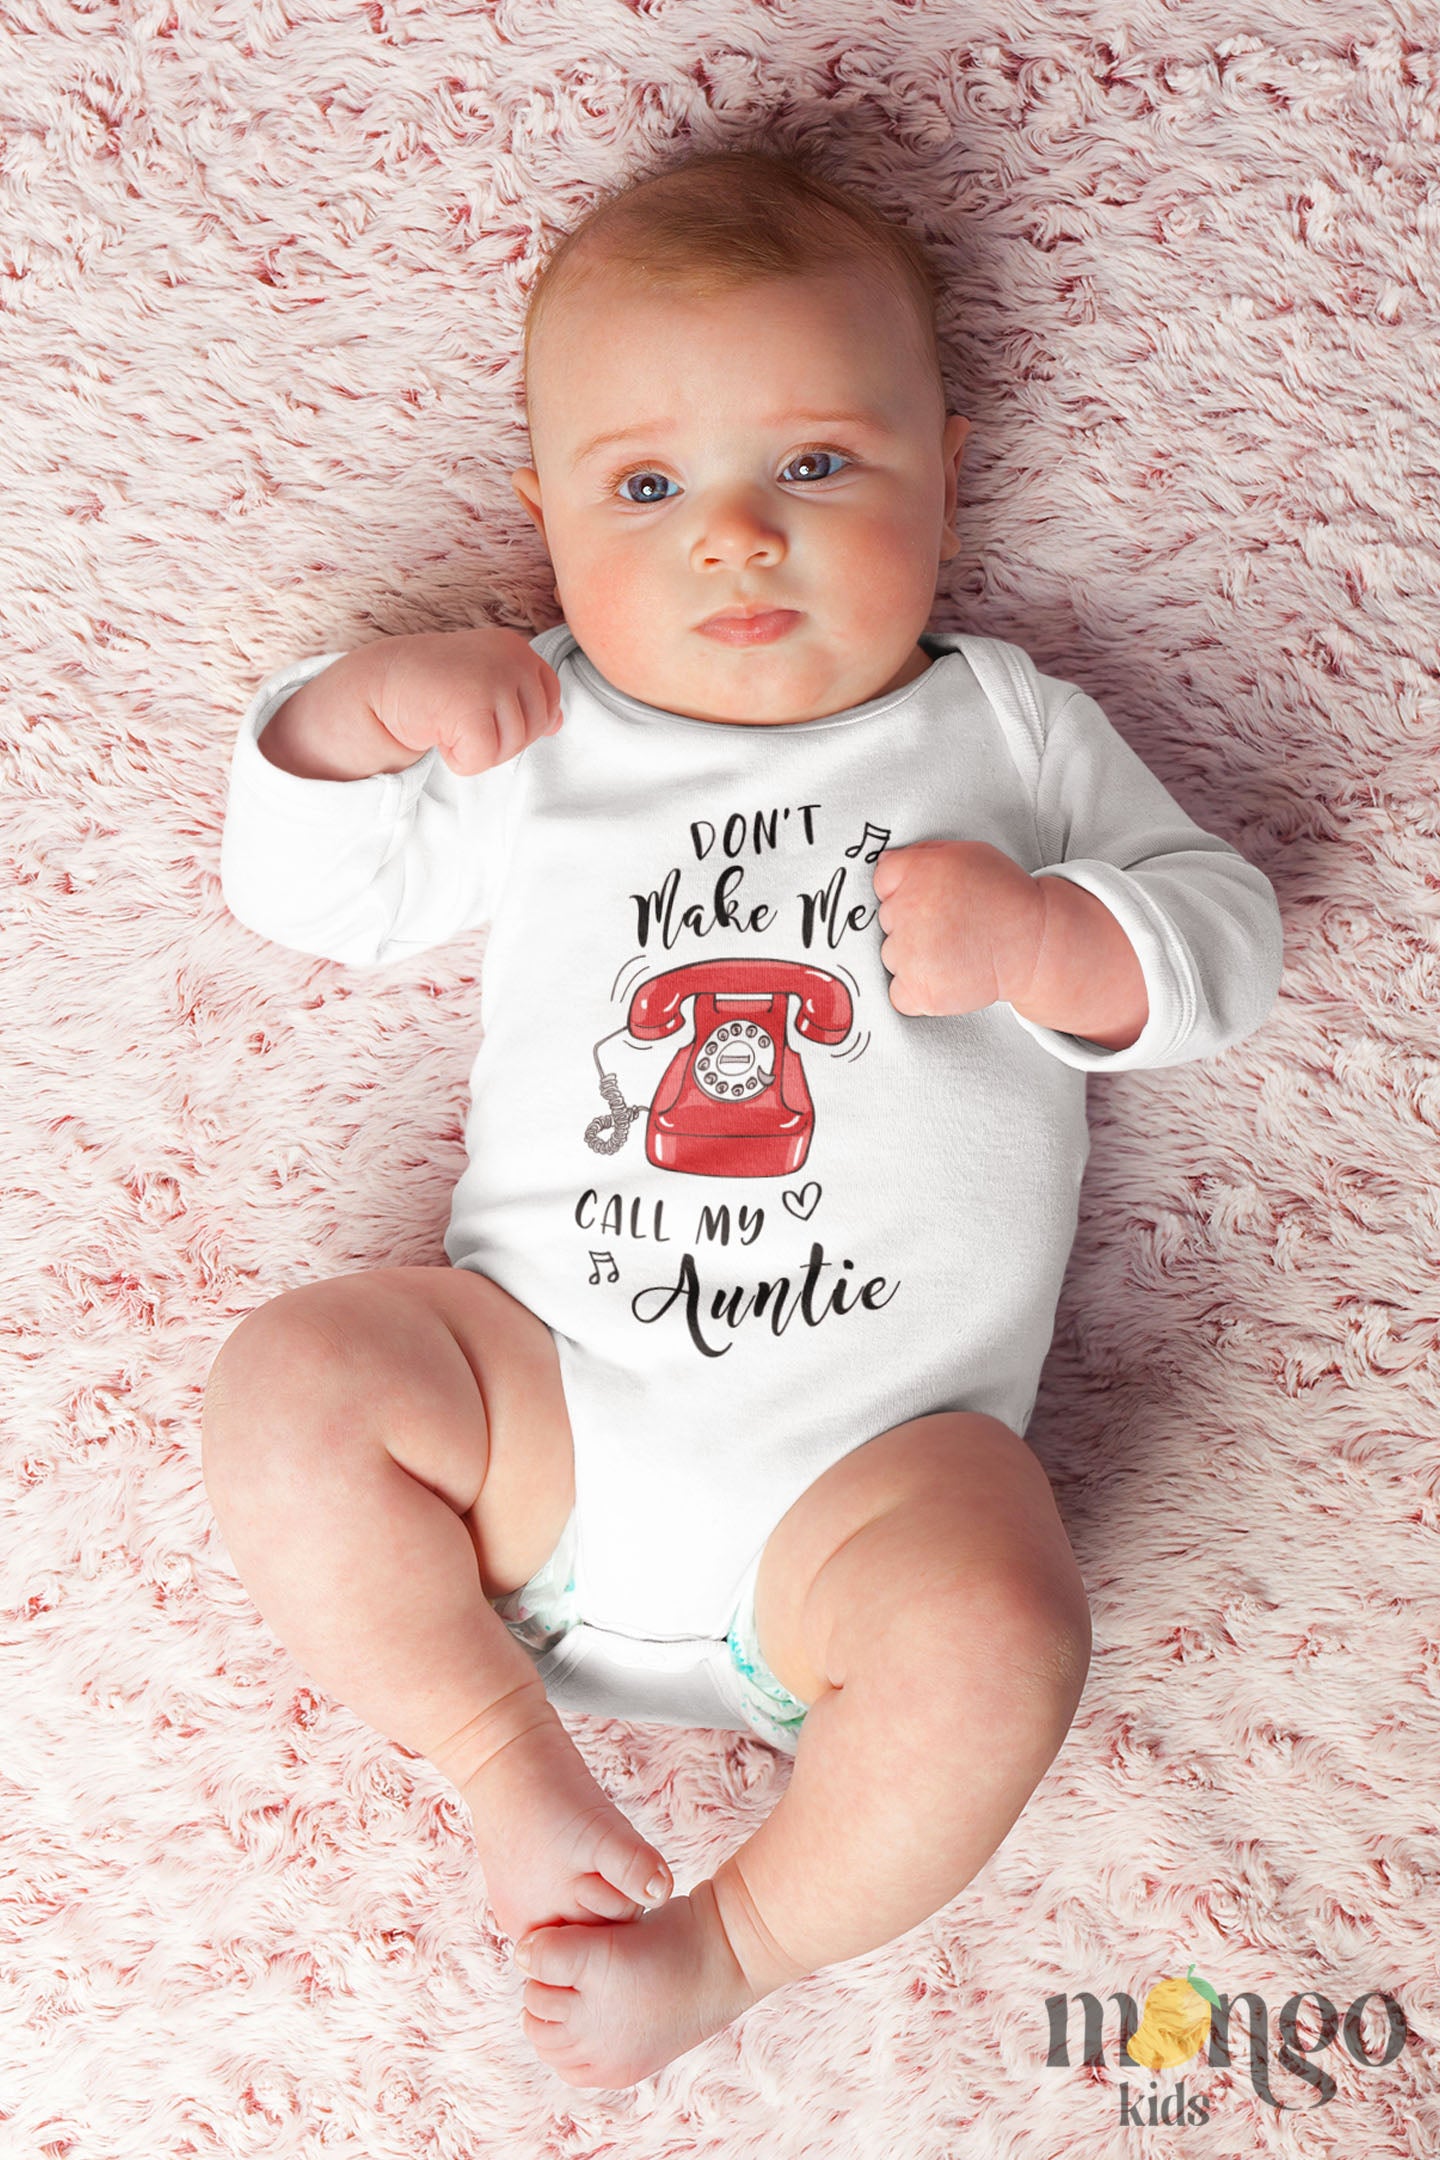 Printed Baby Onesies - Kid's t-shirt showcasing a cute printed graphic of a telephone with the text 'Don't Make Me Call My Auntie.' Explore this witty and playful tee that celebrates family bonds.